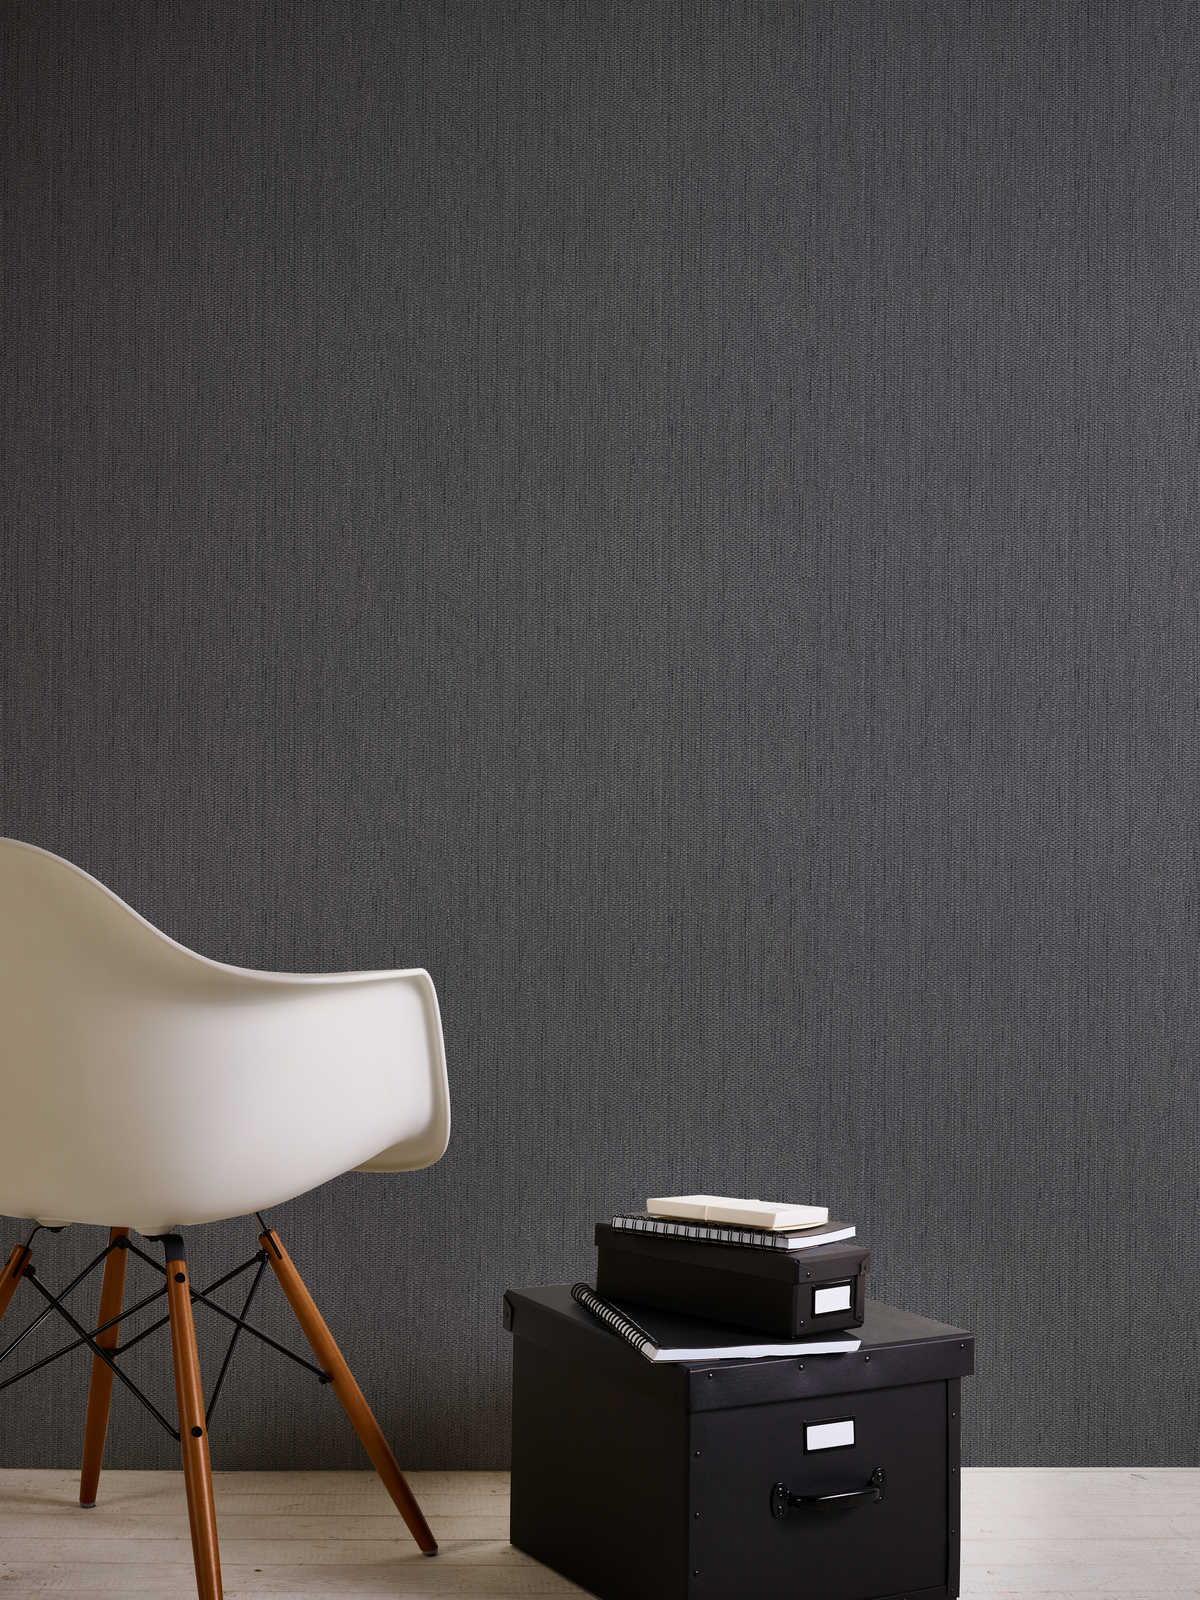             Linen look wallpaper with textile structure - grey, black
        